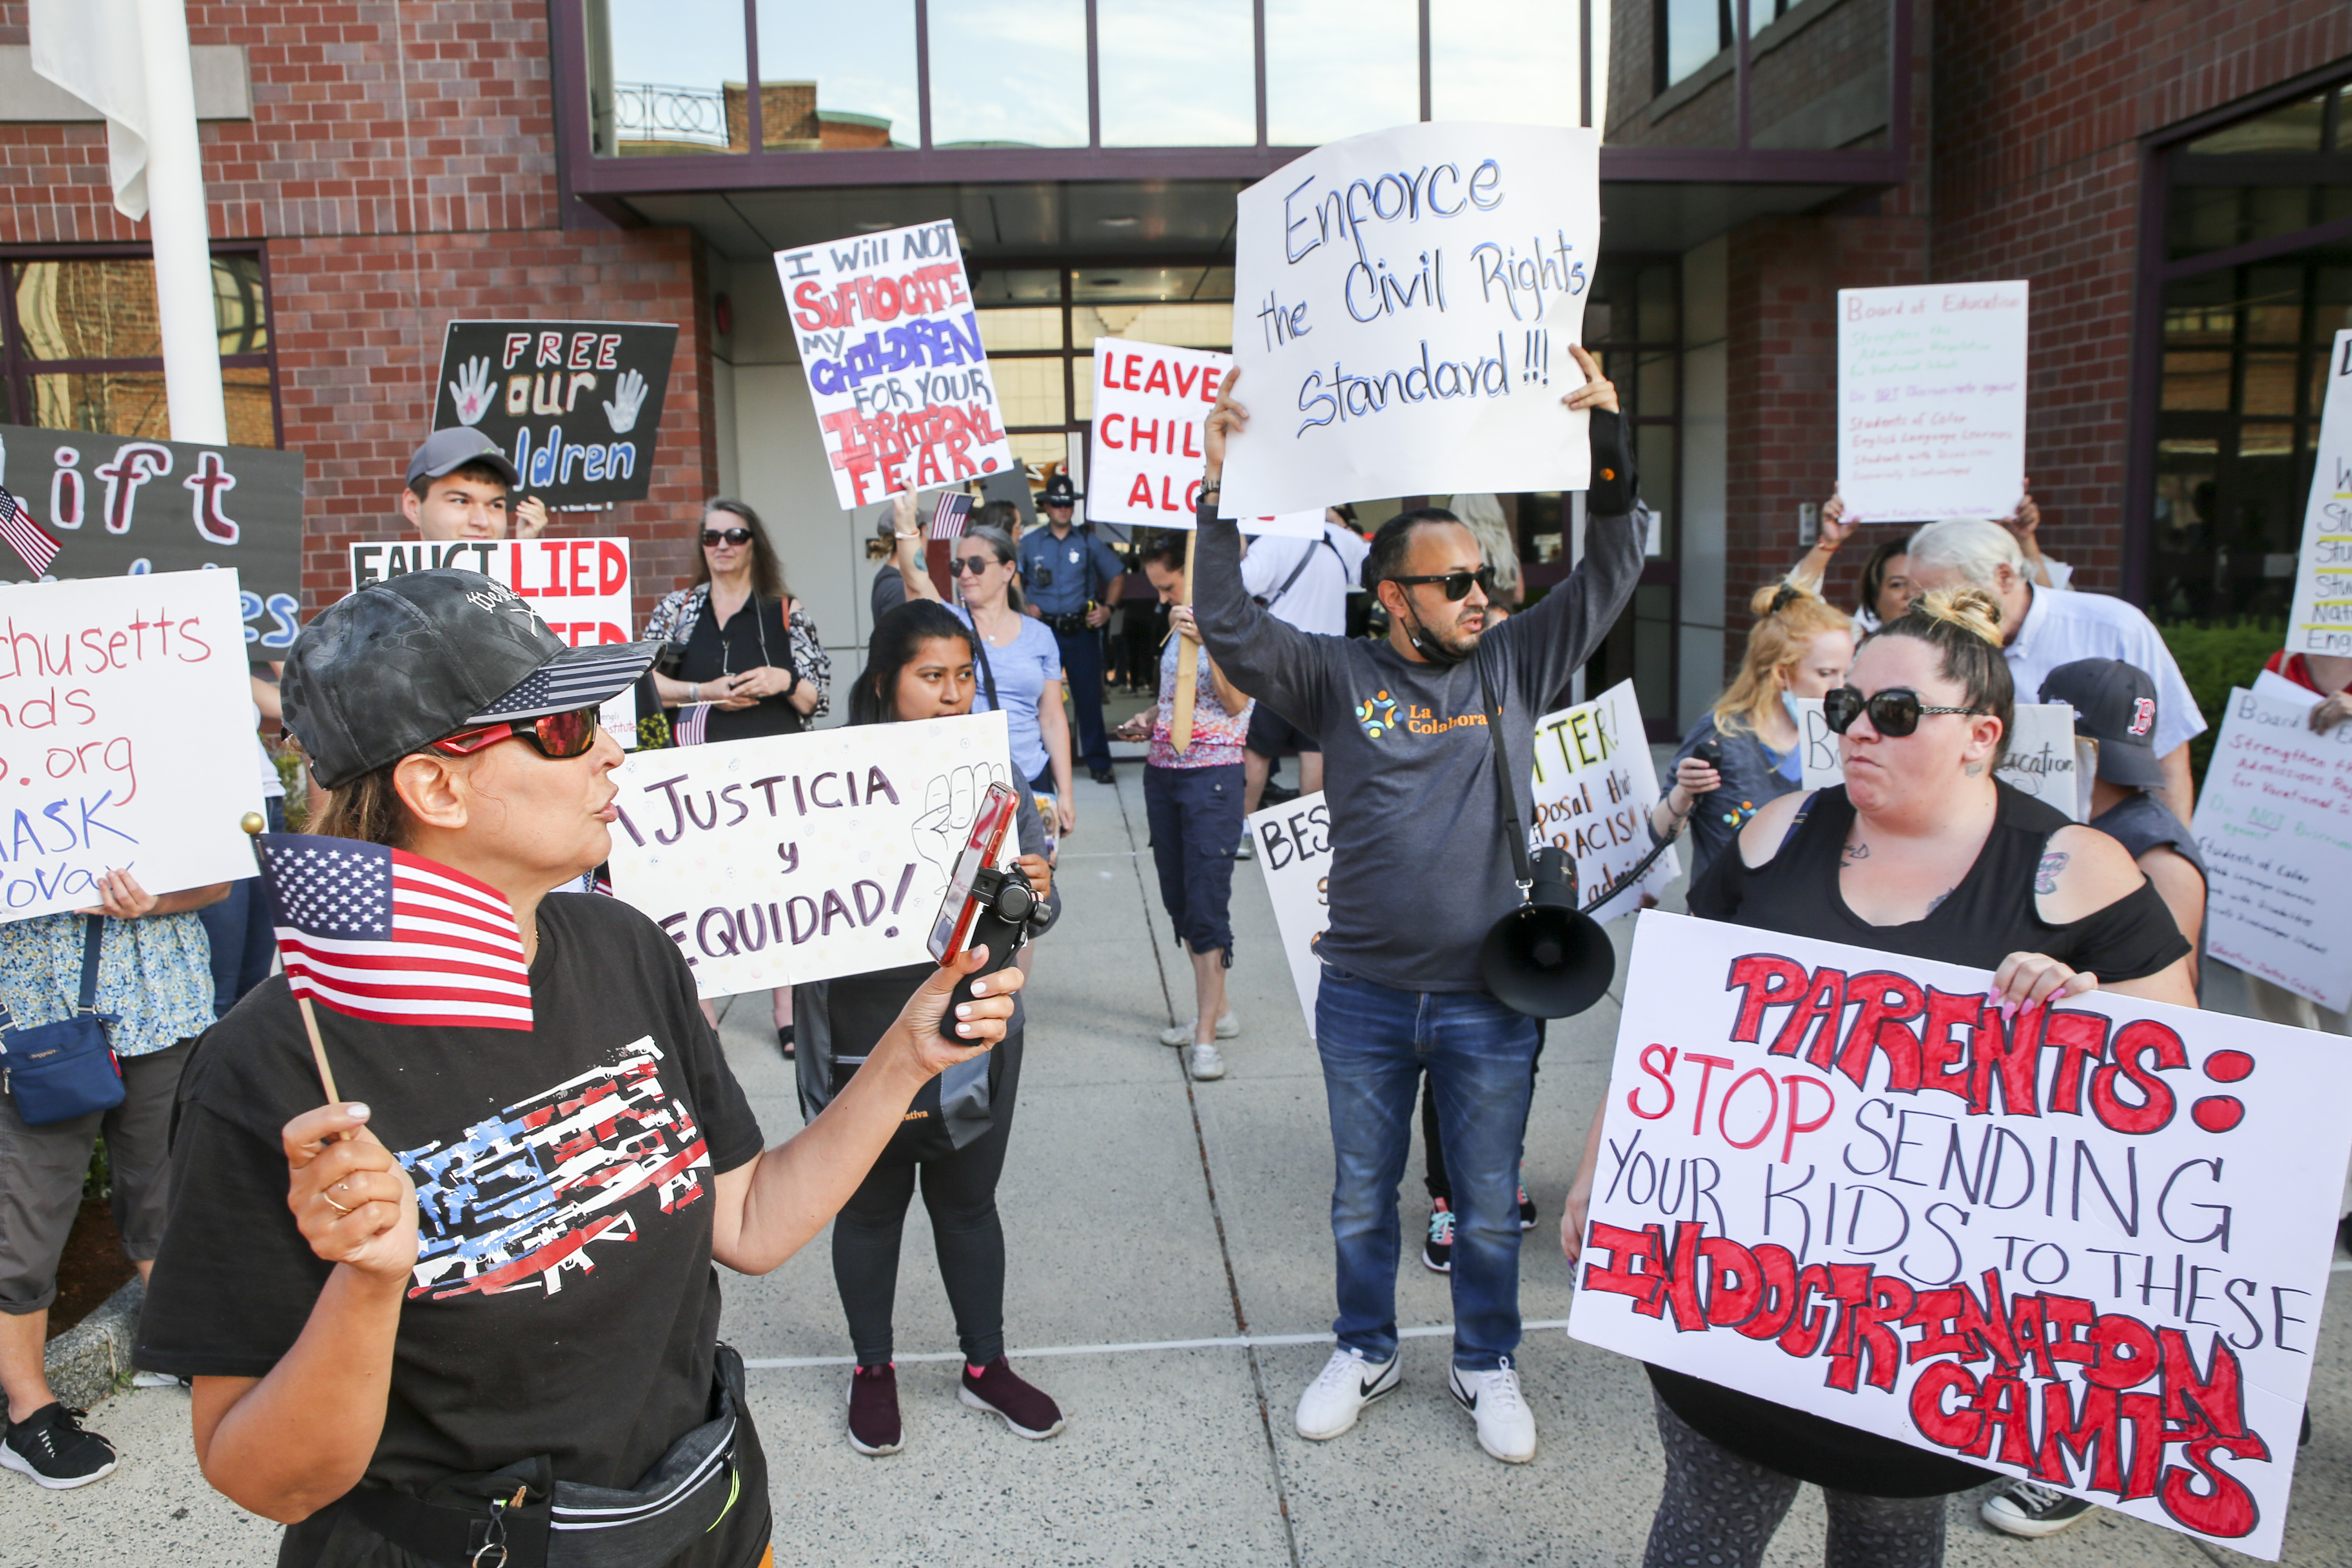 A separate group protesting against mask warrants in schools attempted to eclipse, and at times became at odds with, the Vocational Educational Justice Coalition.